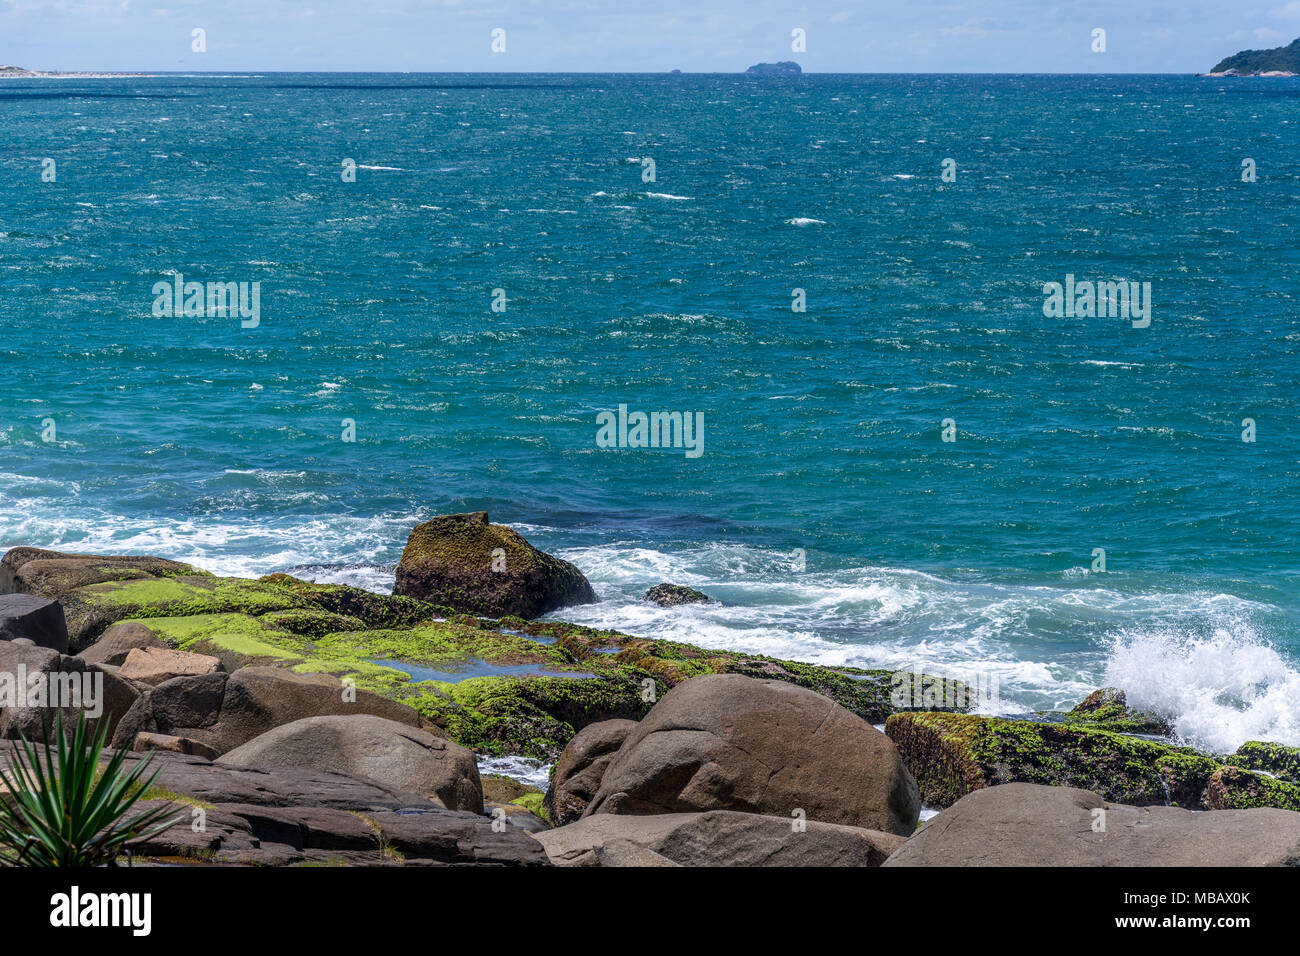 Florianopolis, Brazil. February, 2018. Sea and rocky region at the south of the island. Stock Photo